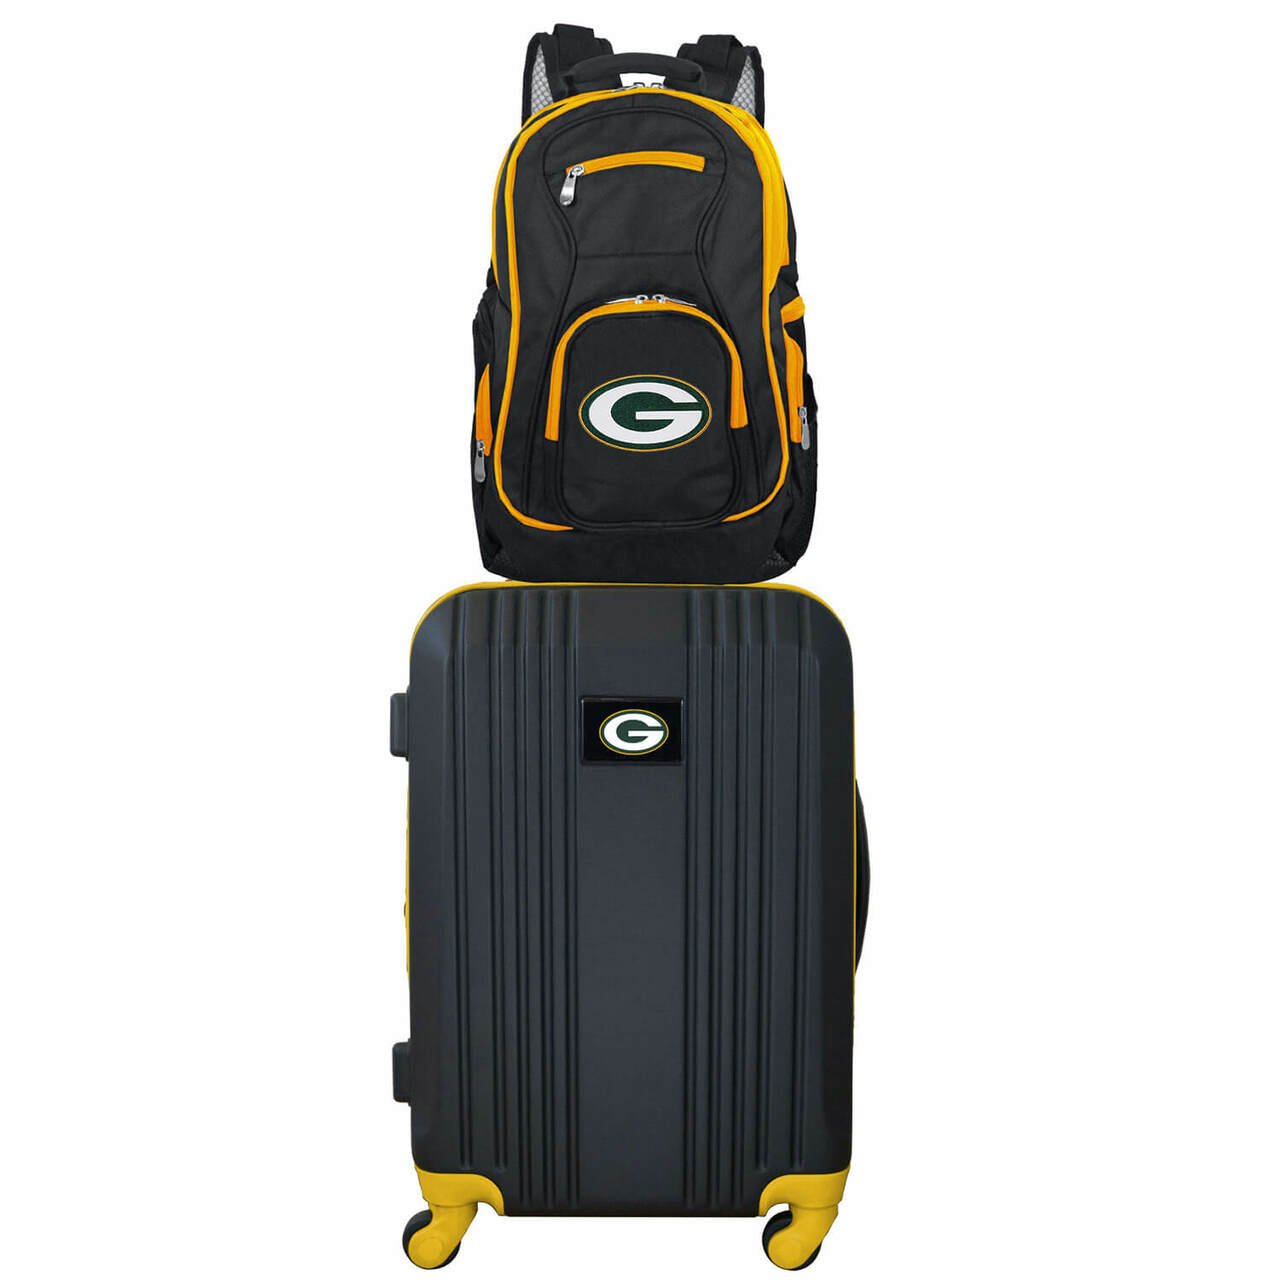 Green Bay Packers 2 Piece Premium Colored Trim Backpack and Luggage Set